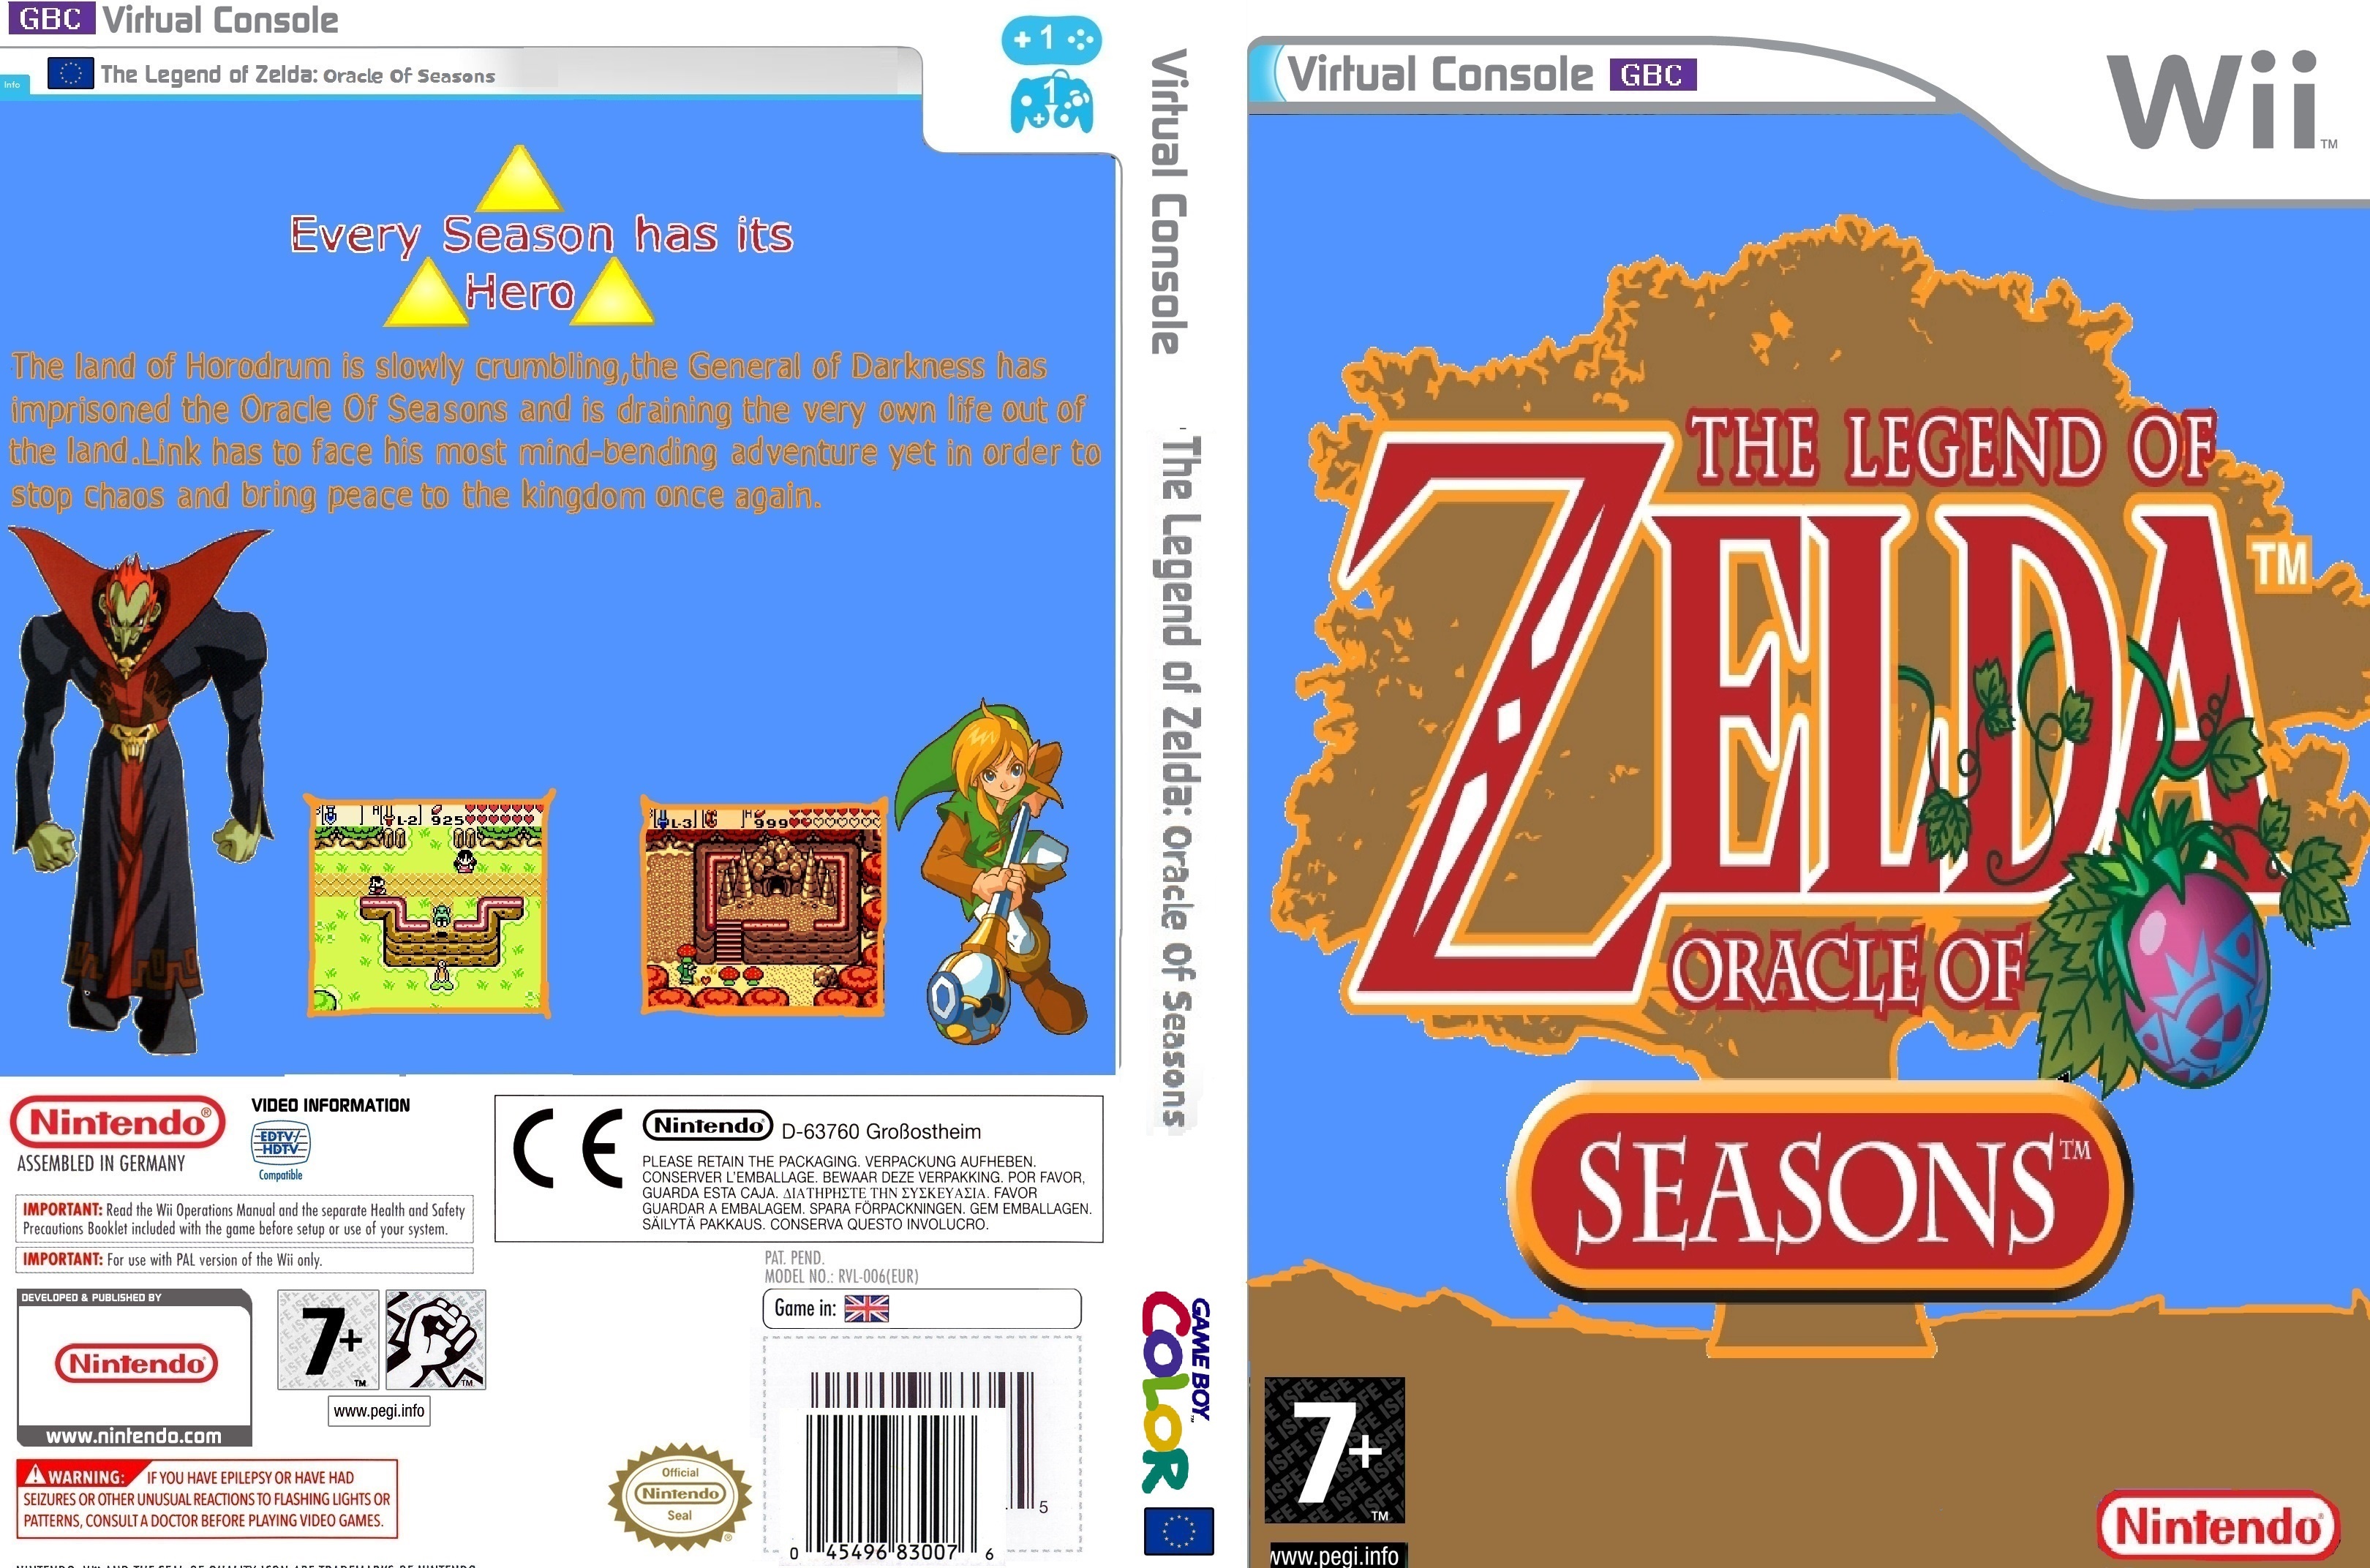 The Legend of Zelda: Oracle of Seasons box cover